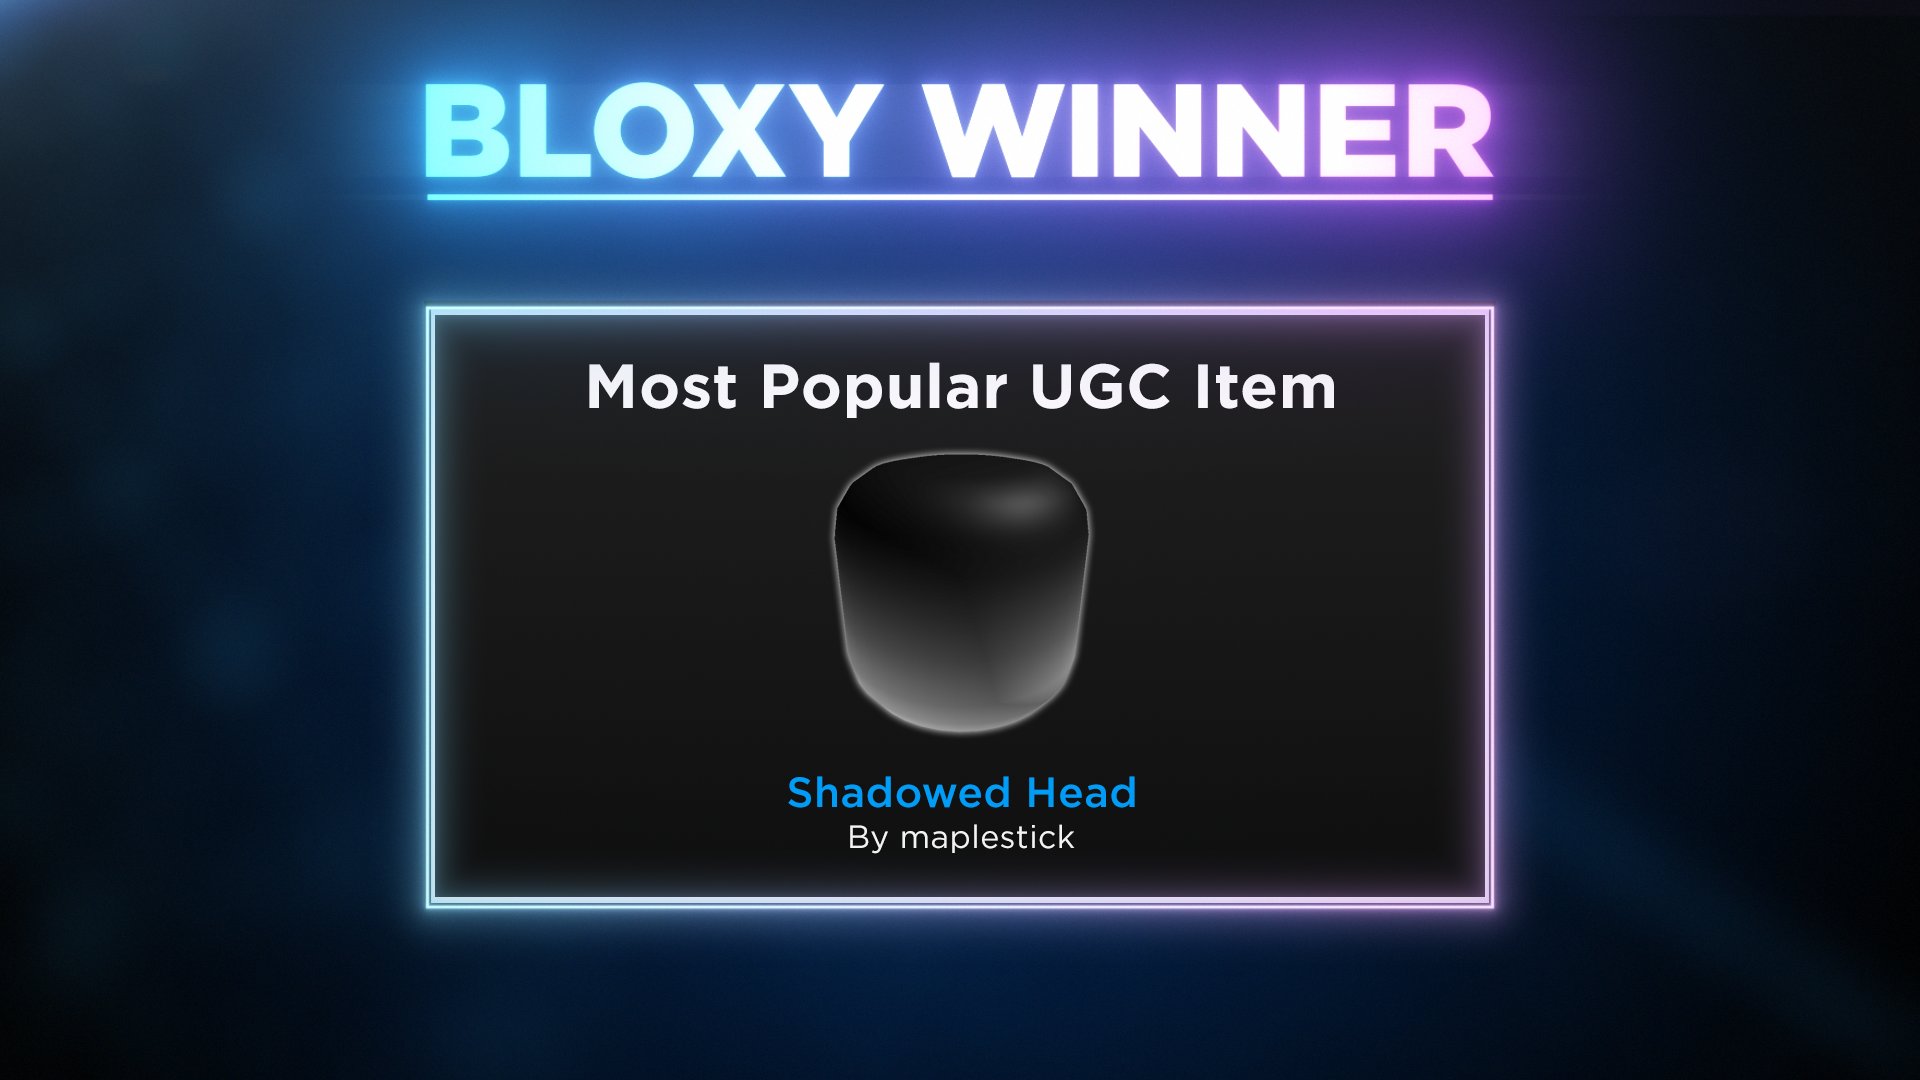 Roblox On Twitter Congratulations To Maplestick1 For Winning Most Popular Ugc Item With Shadowed Head Your Simple But Extremely Cool Effect Spiced Up Avatars All Over The World Bloxyawards Roblox Https T Co Hmphlpgflc - most popular roblox catalog items